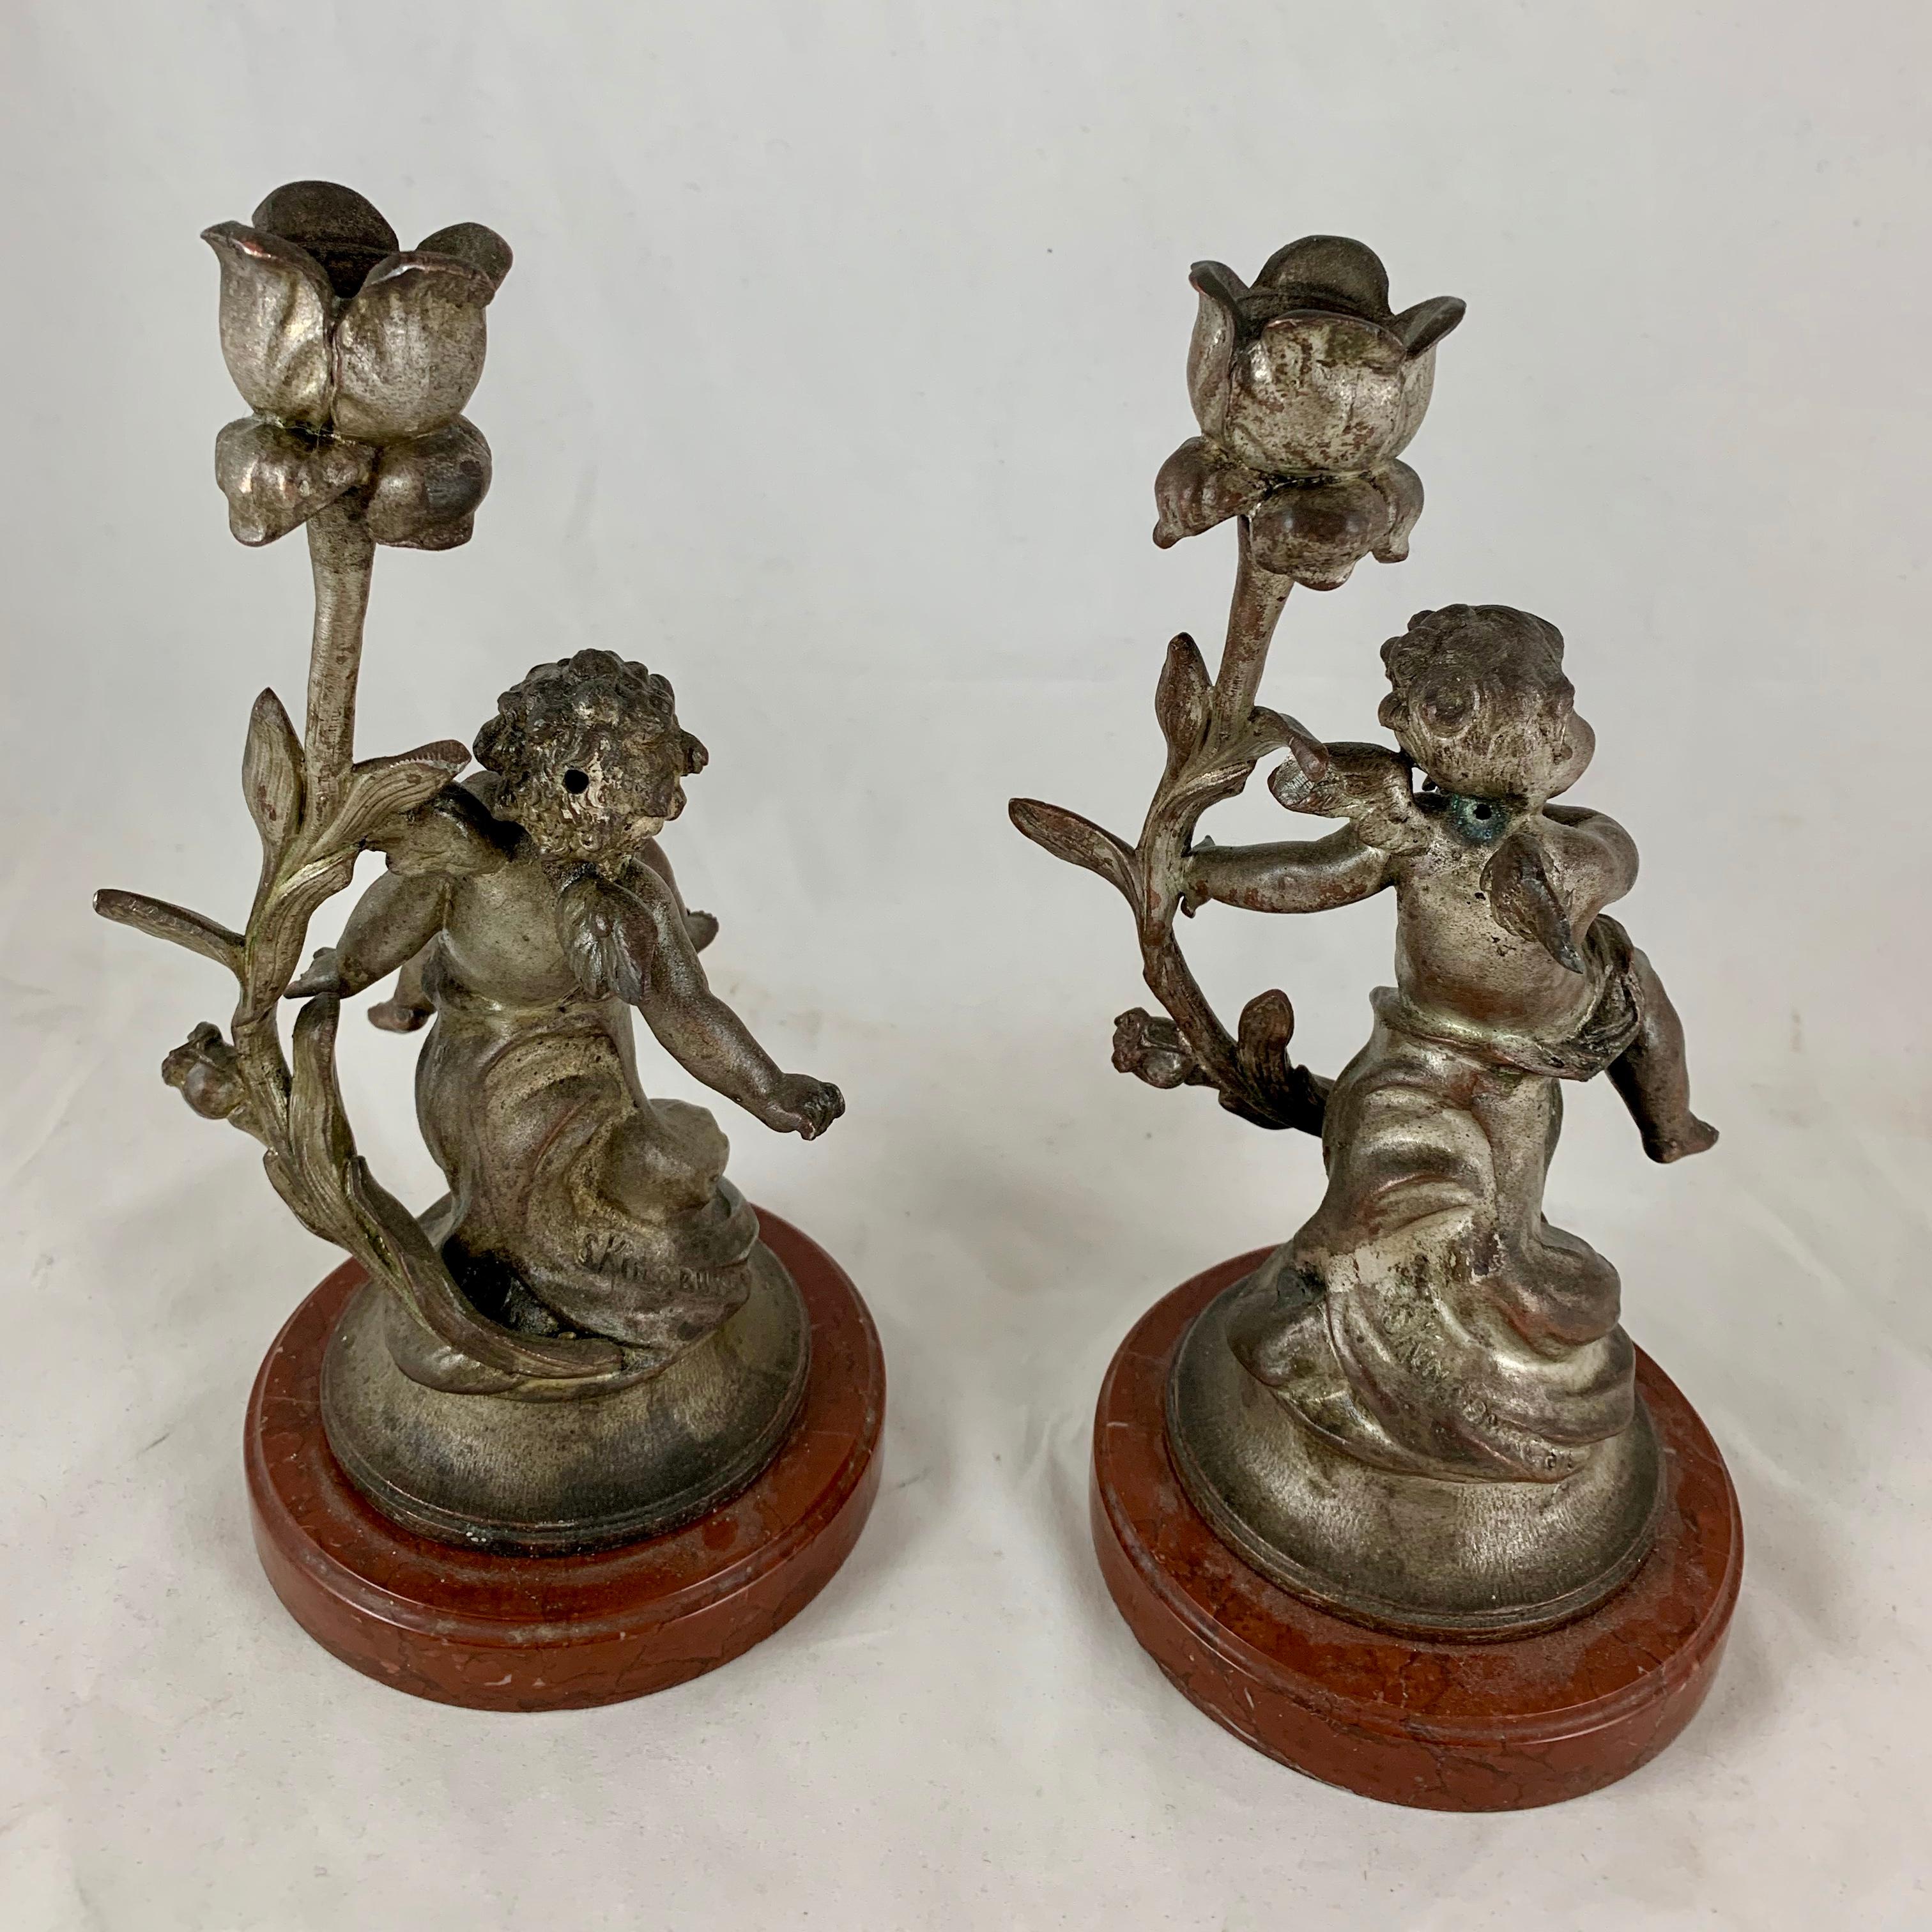 French Putti Cherub Candlesticks Signed Sylvain Kinsburger Spelter & Marble S/2 1